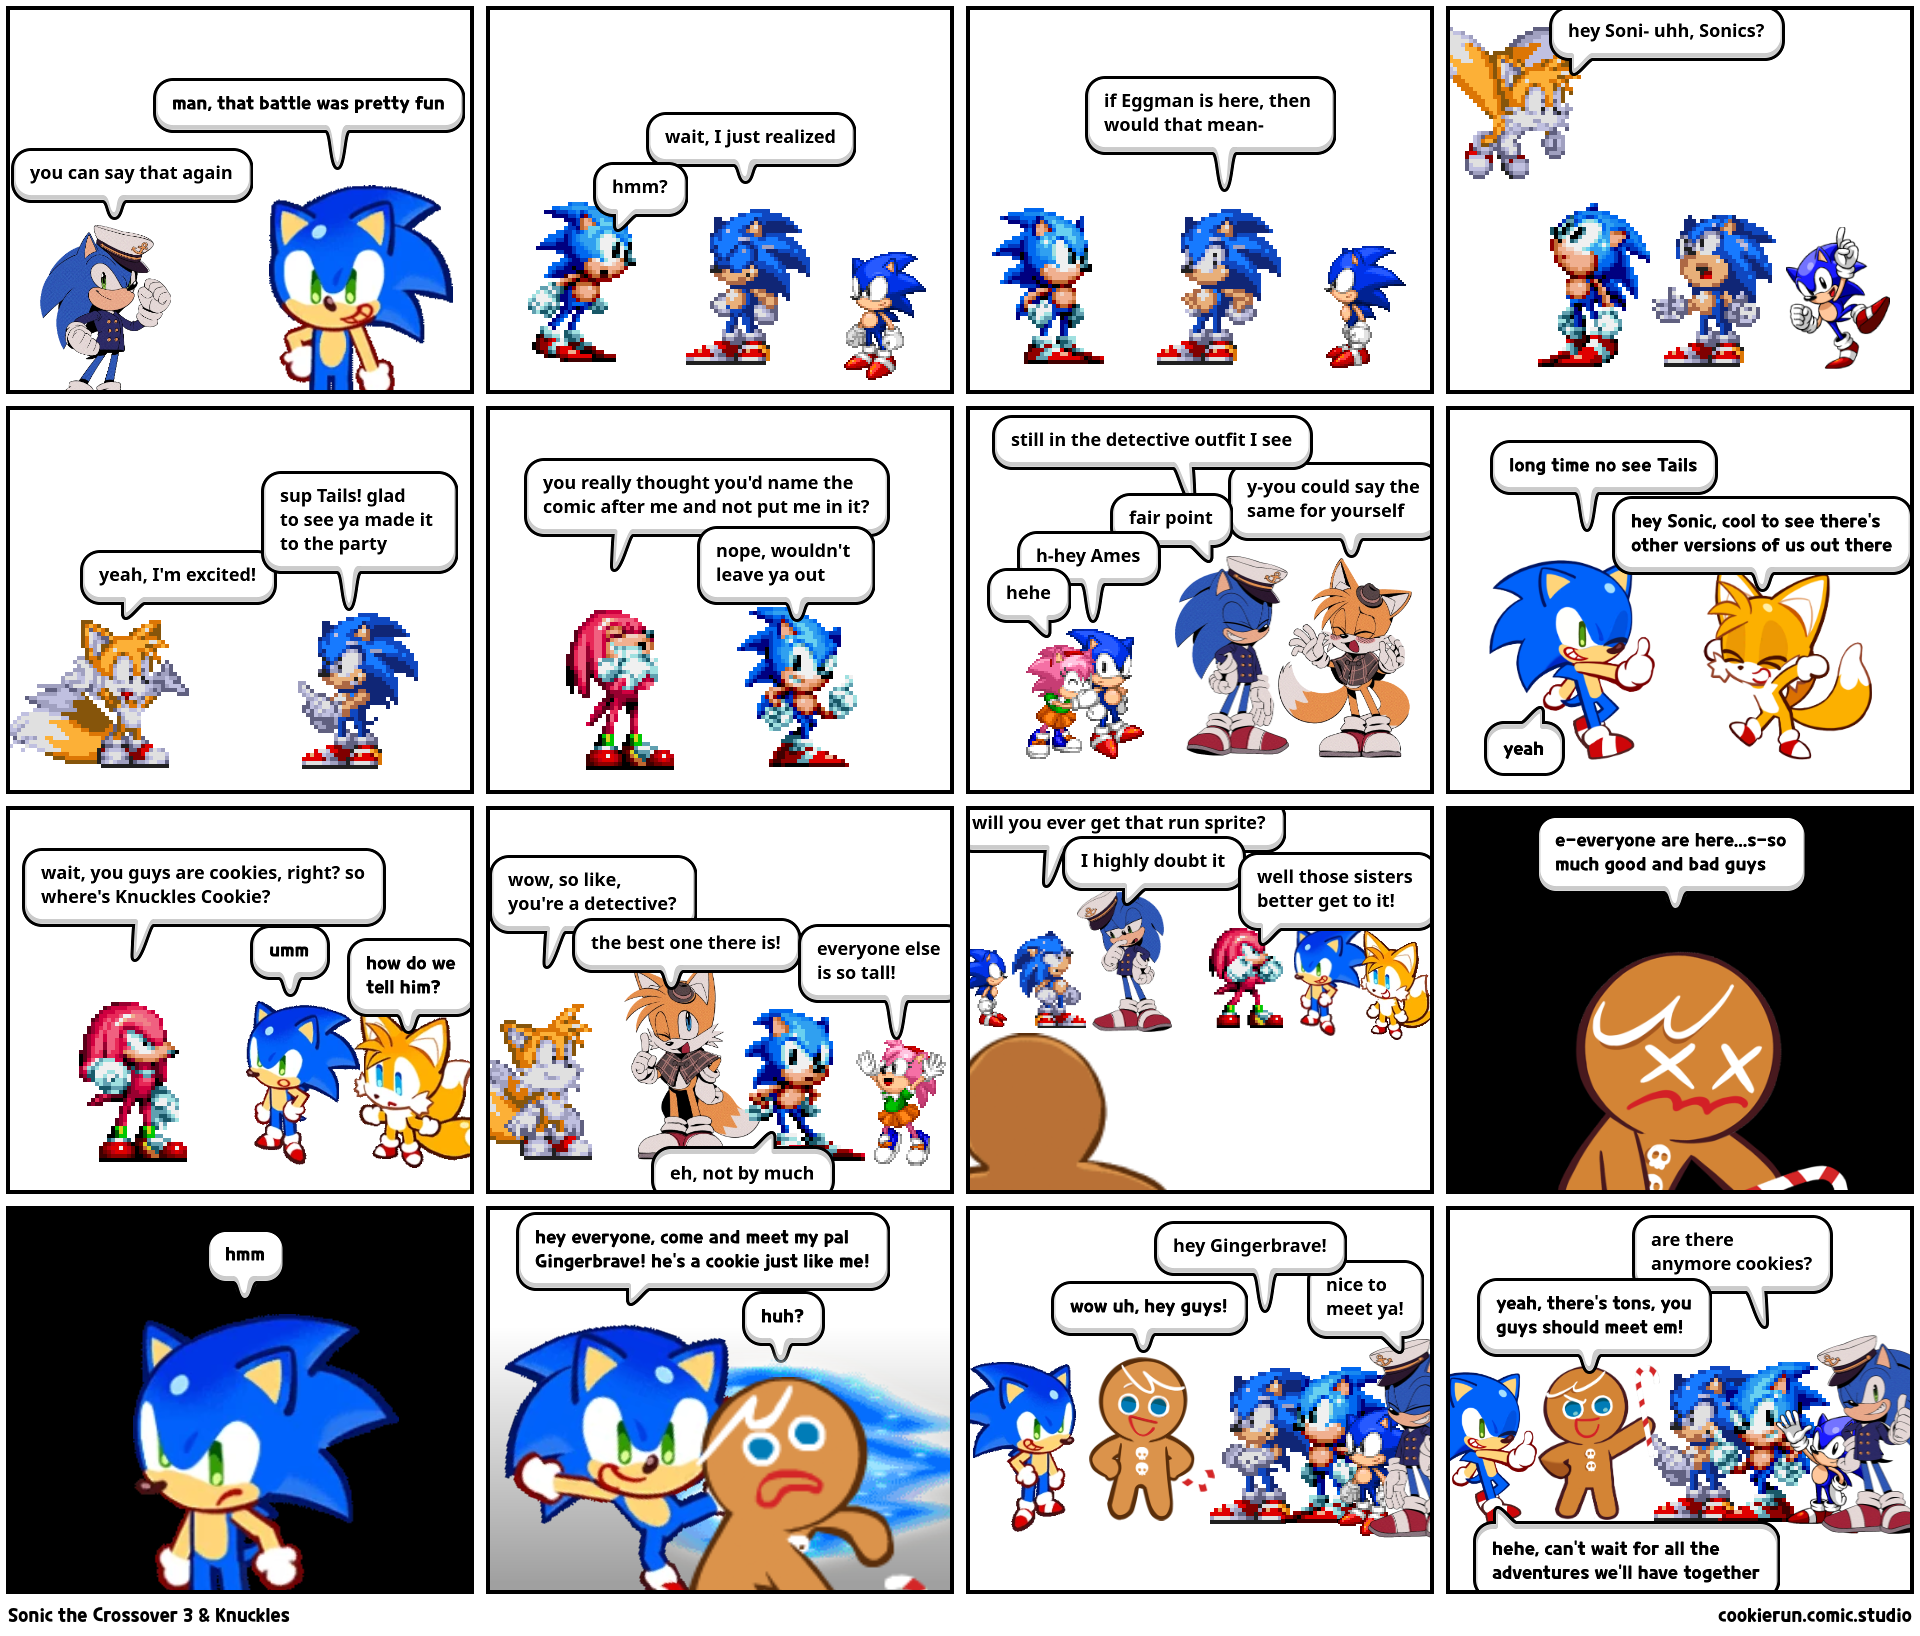 I completed Sonic 3 and Knuckles 4 times - Comic Studio